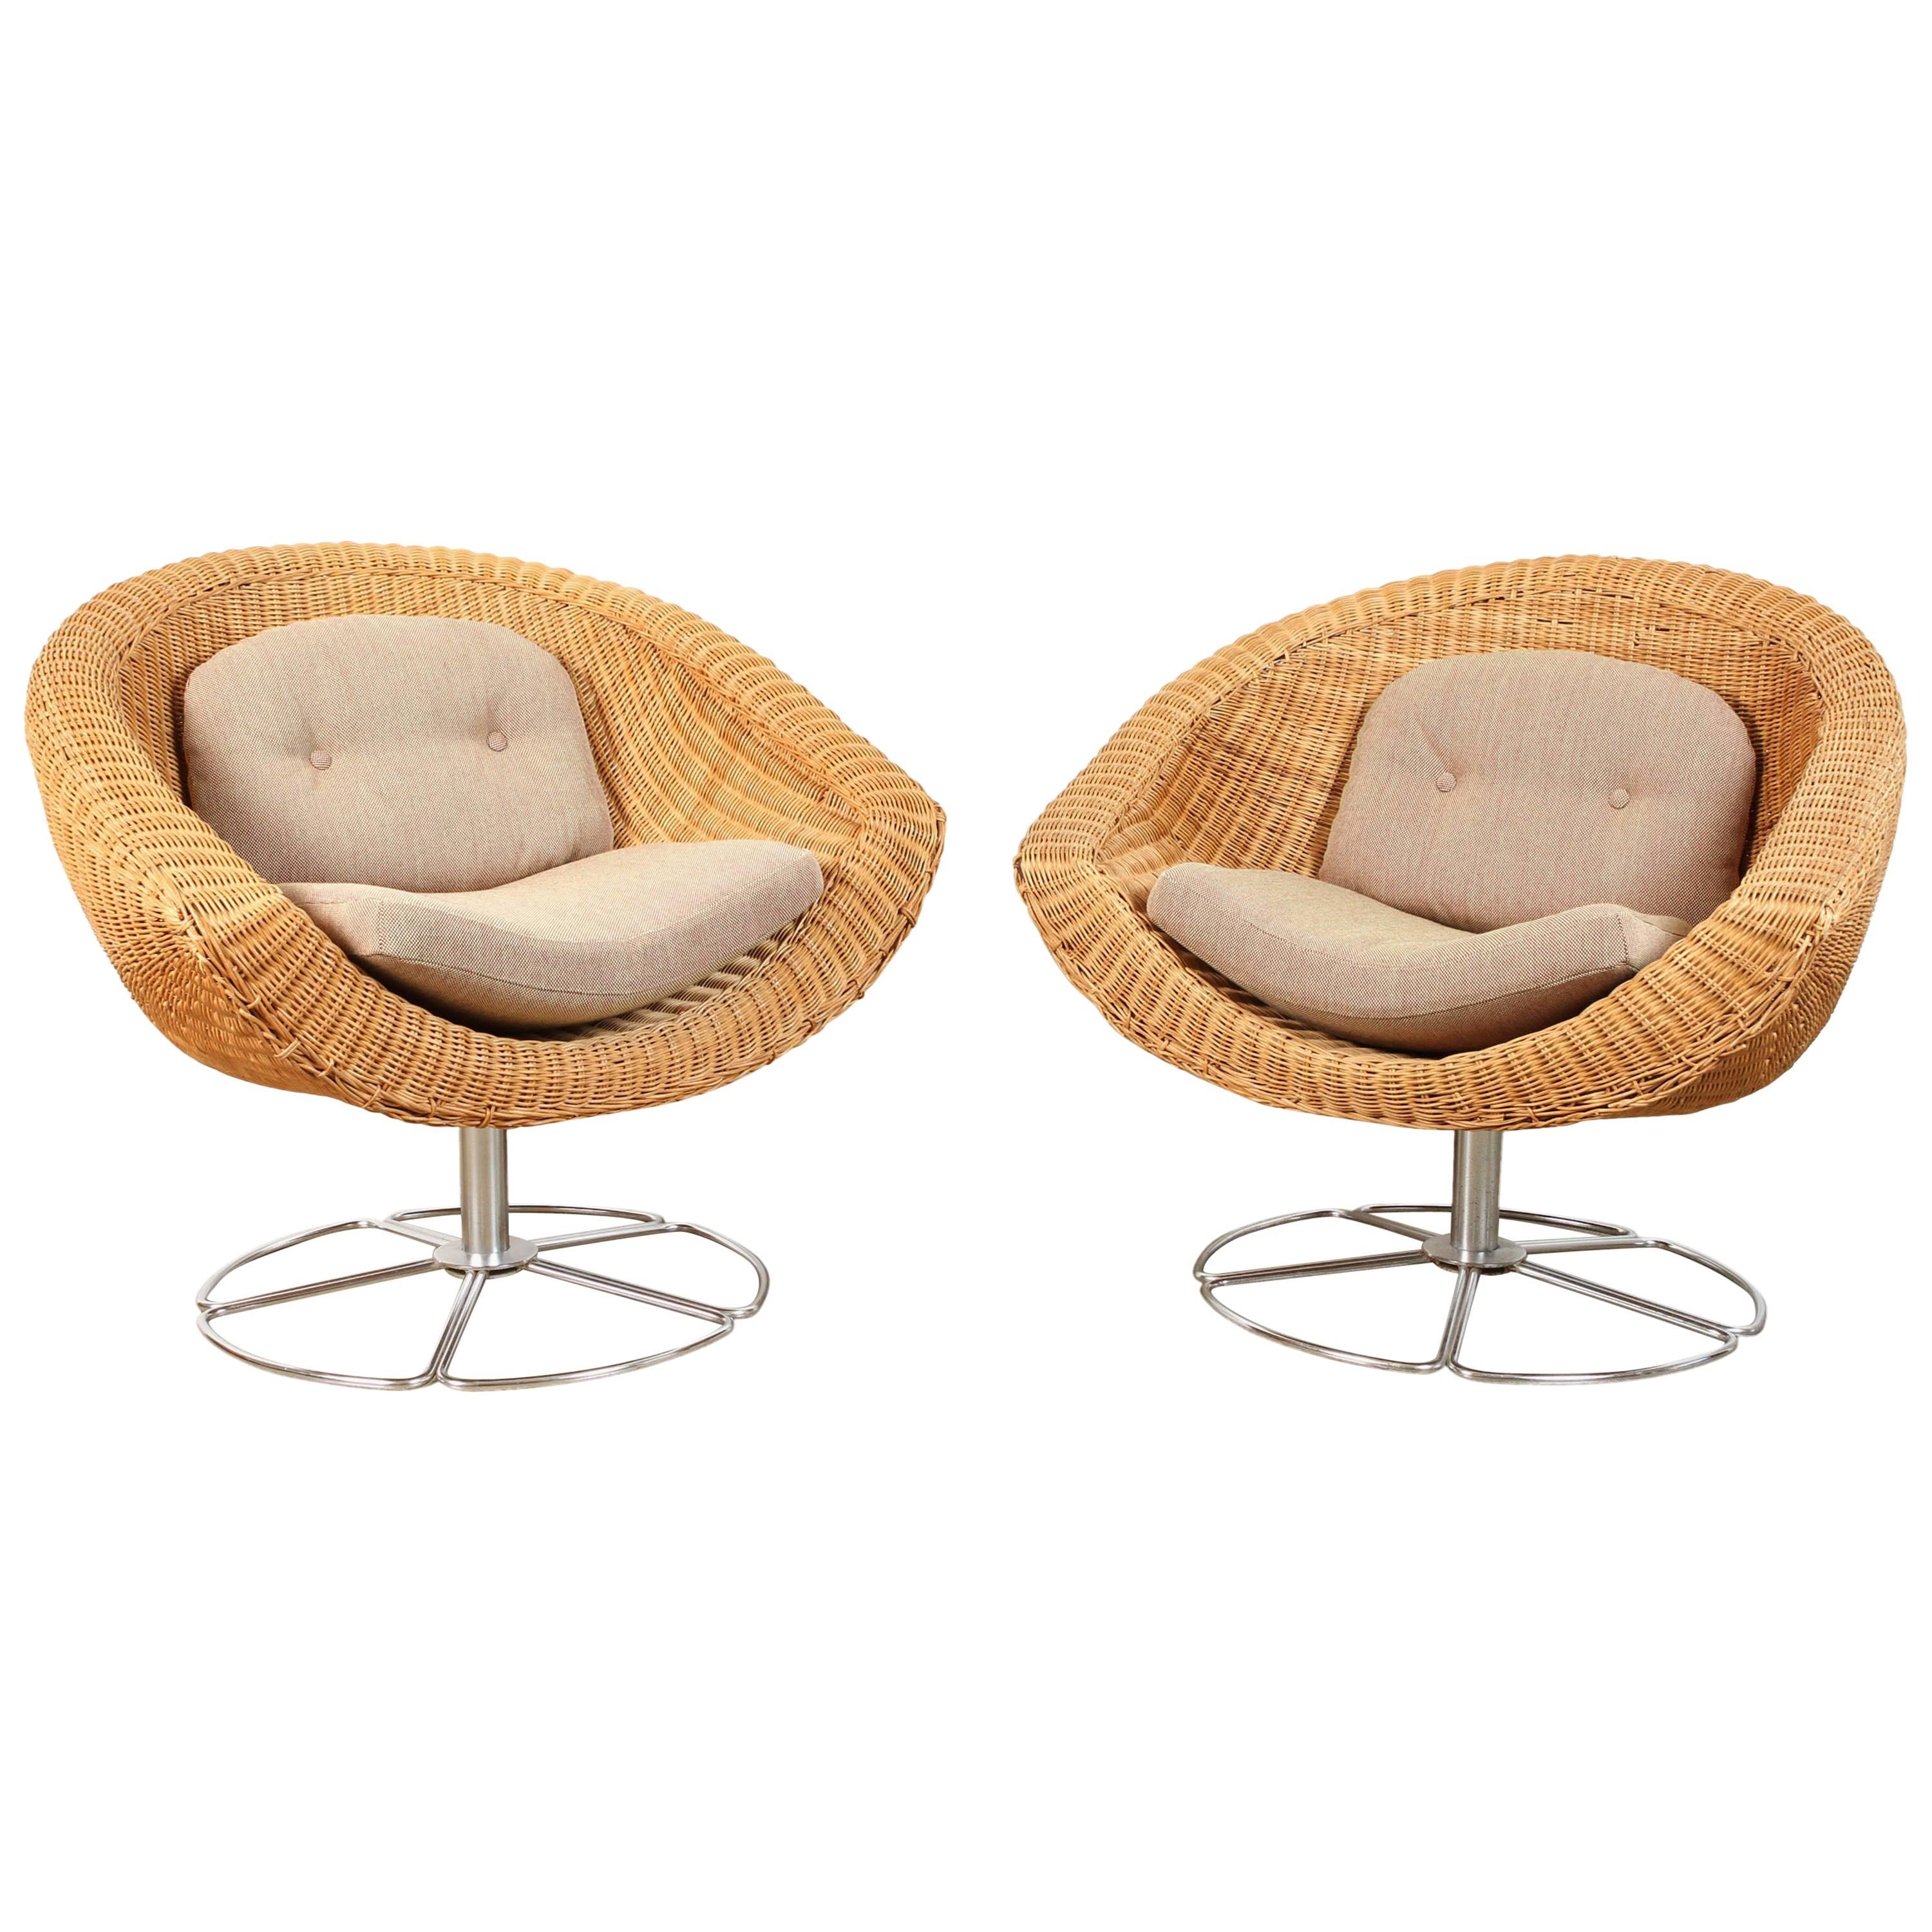 Pair of Vintage Wicker Swivel Chairs For Sale